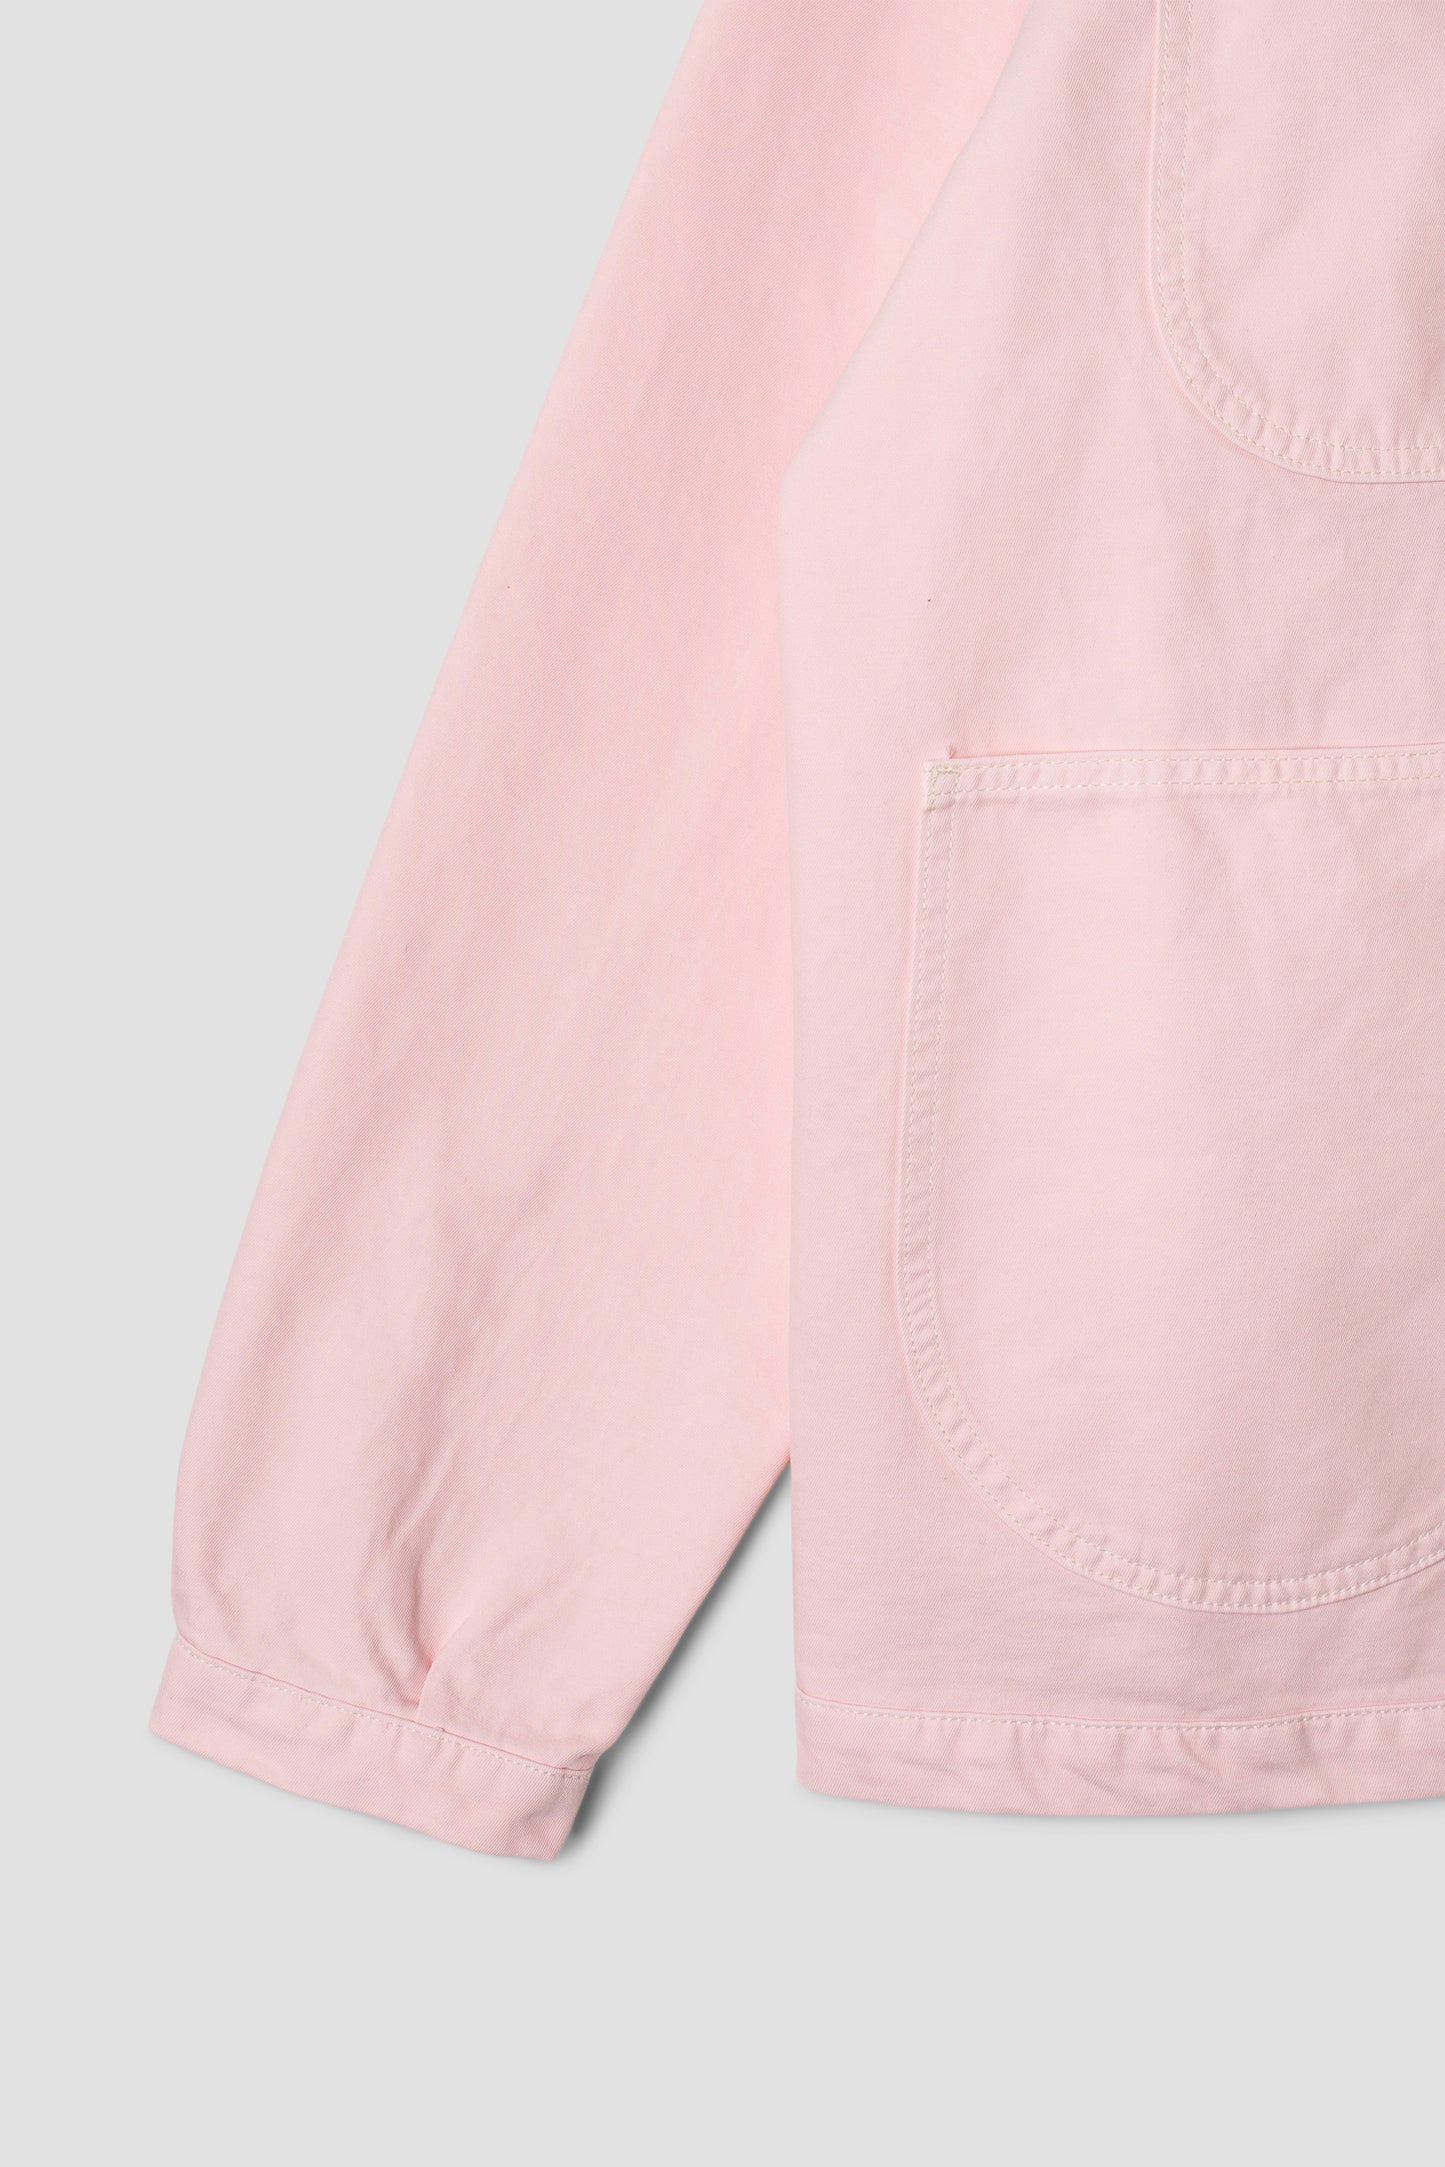 Coverall Jacket (Pink)